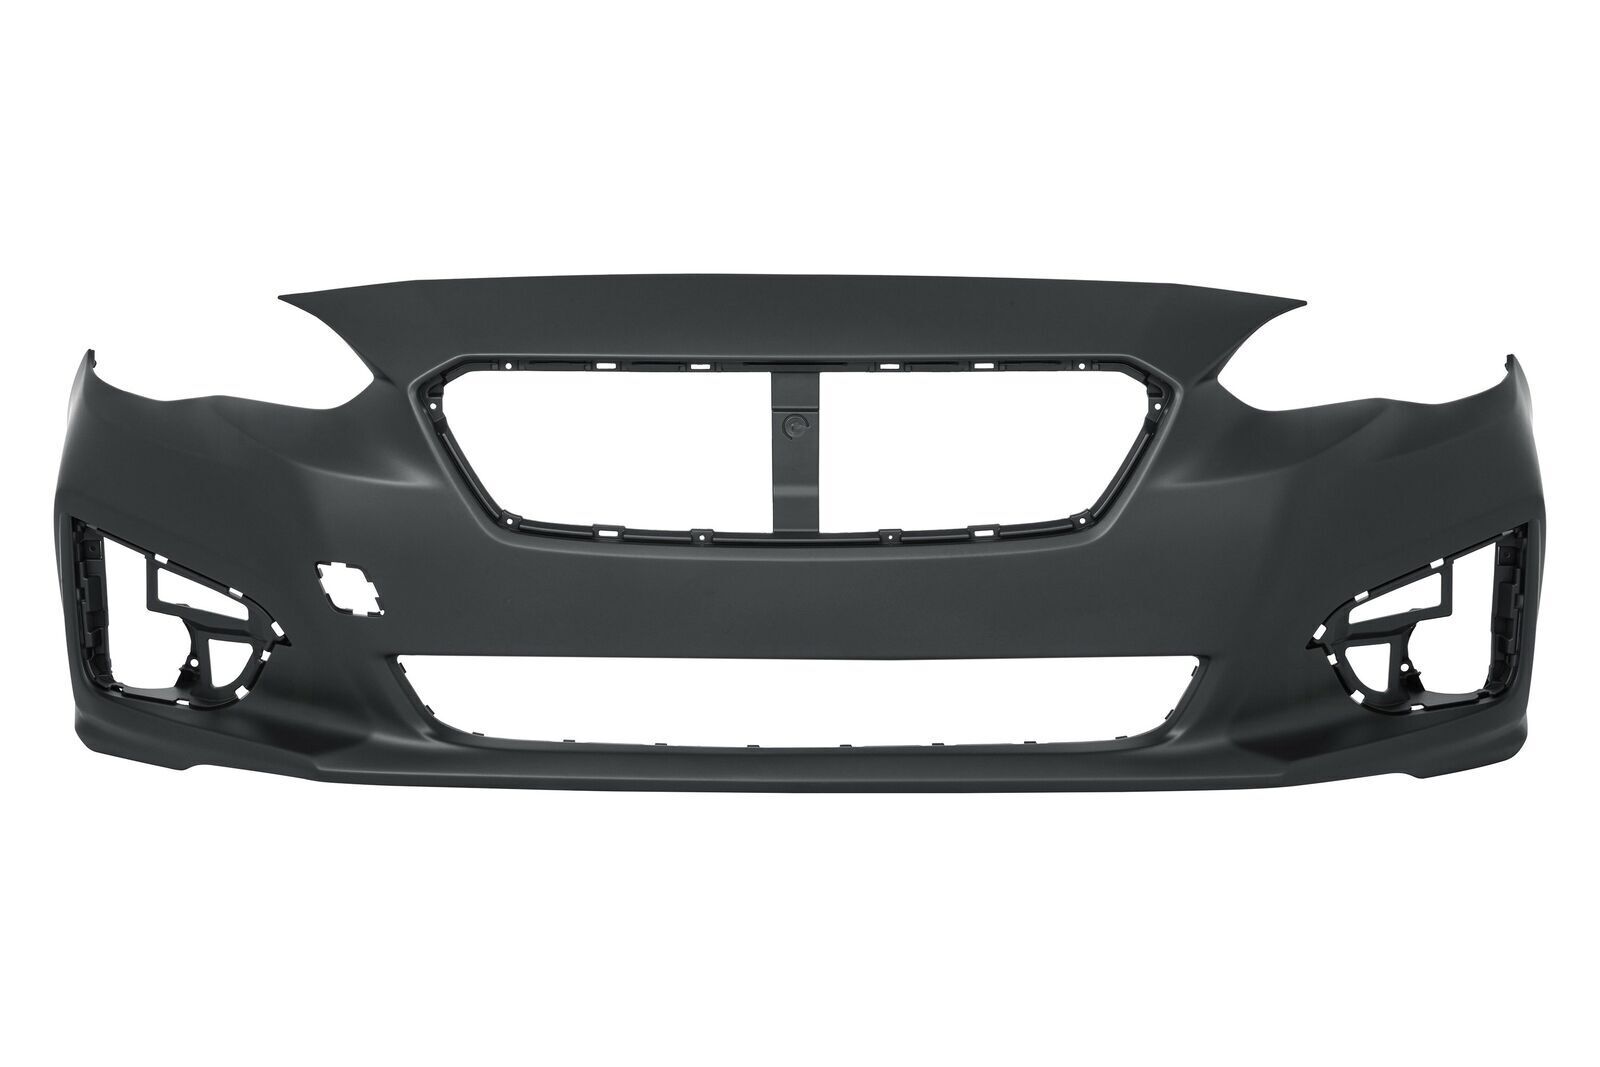 2017-2019 SUBARU IMPREZA; Front Bumper Cover; Painted to Match